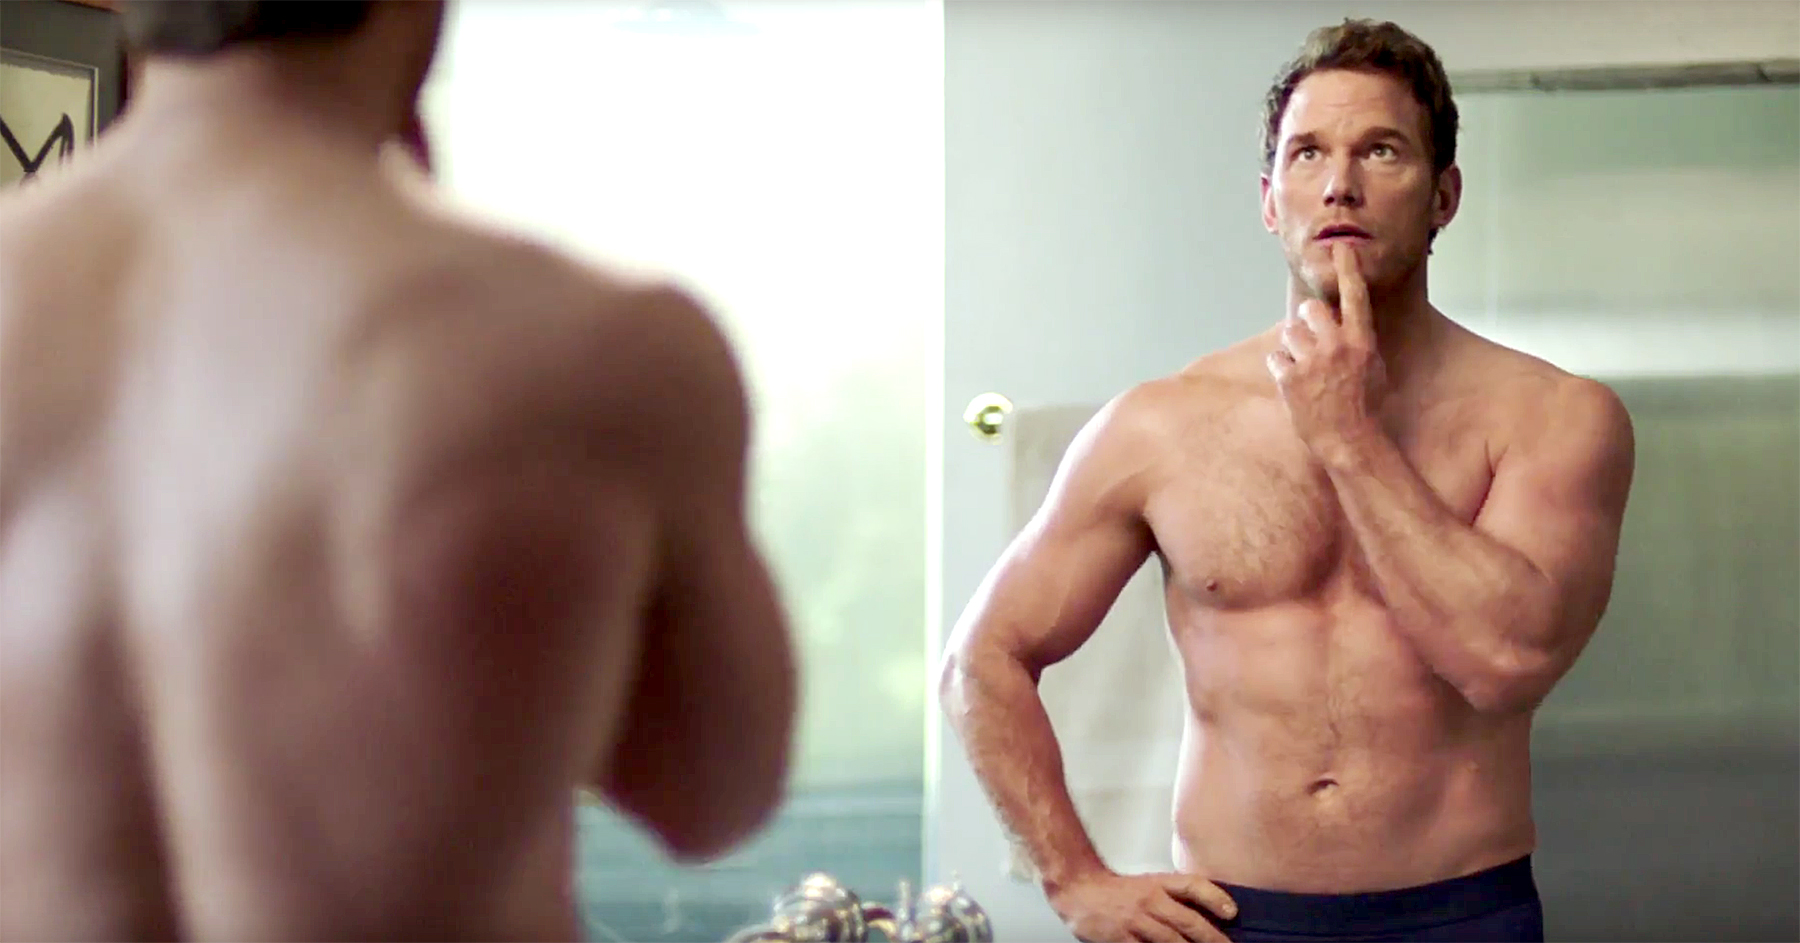 Chris Pratt Goes Shirtless In A Super Bowl Commercial